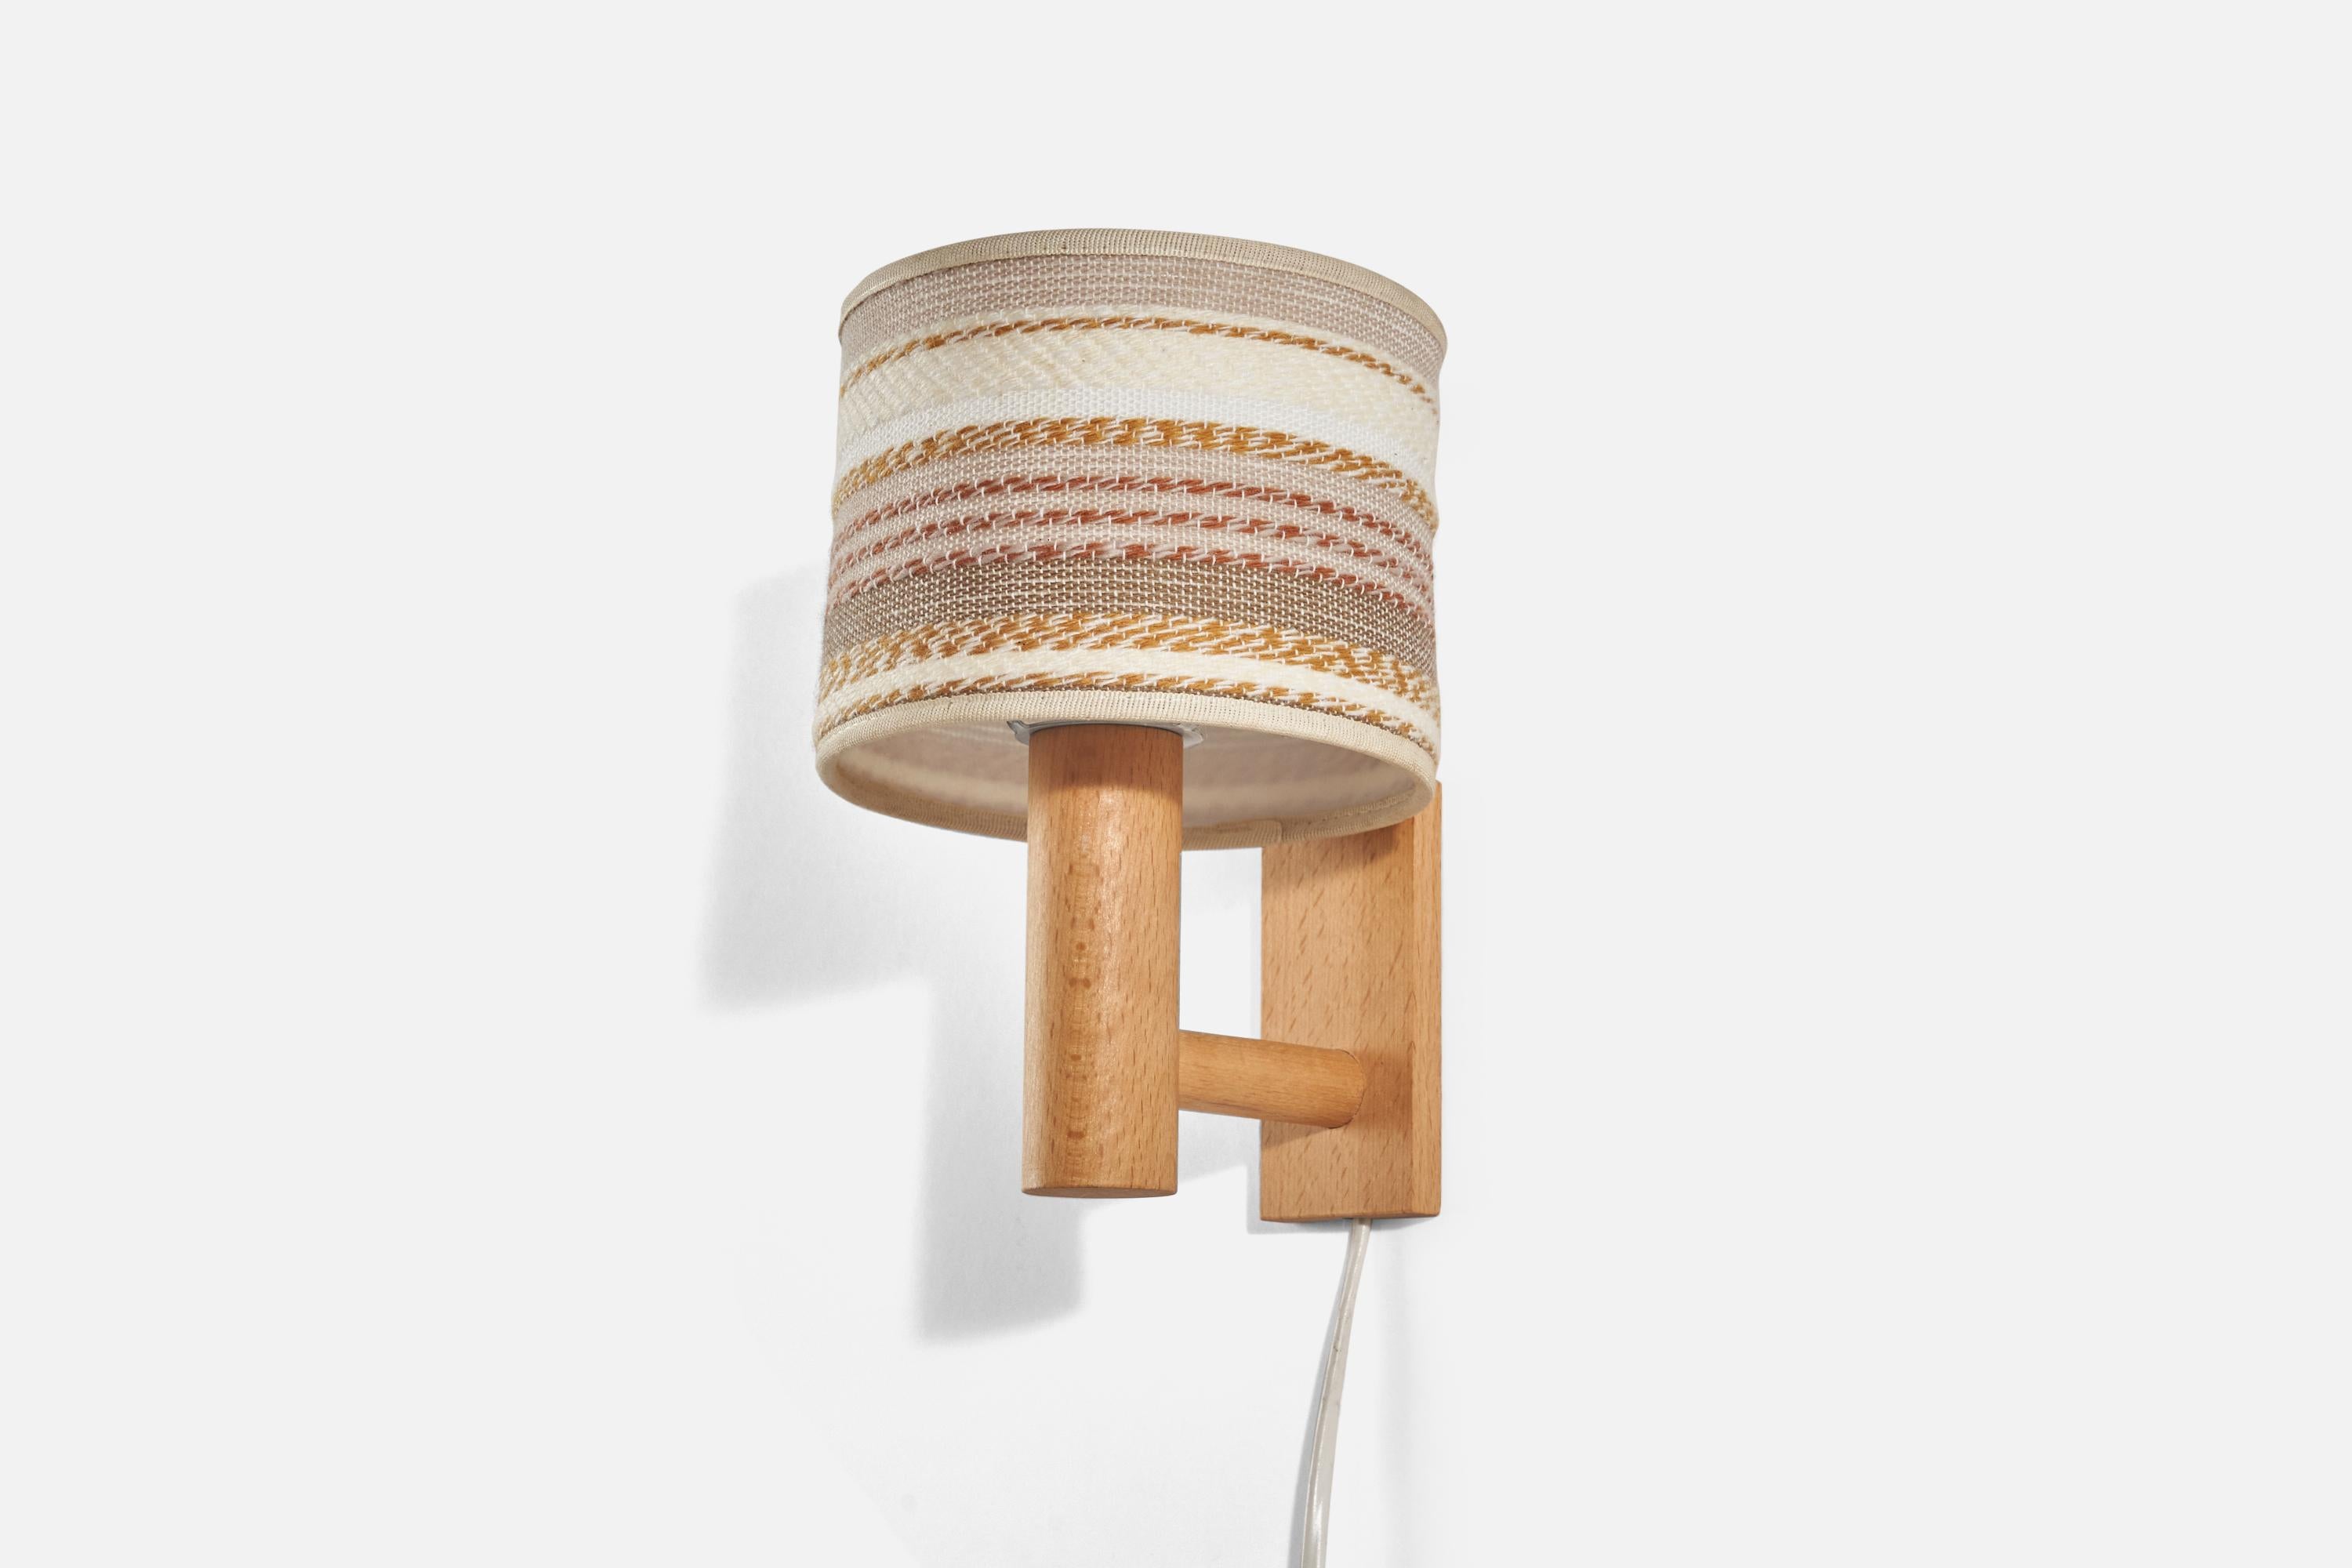 A pair of oak and woven fabric wall lights designed and produced in Sweden, 1970s.

Sold with Lampshade(s). Dimensions stated are of Sconce with Shade(s).

Dimensions of Back Plate (inches) : 4.16 x 1.94 x 0.43 (Height x Width x Depth)

Socket